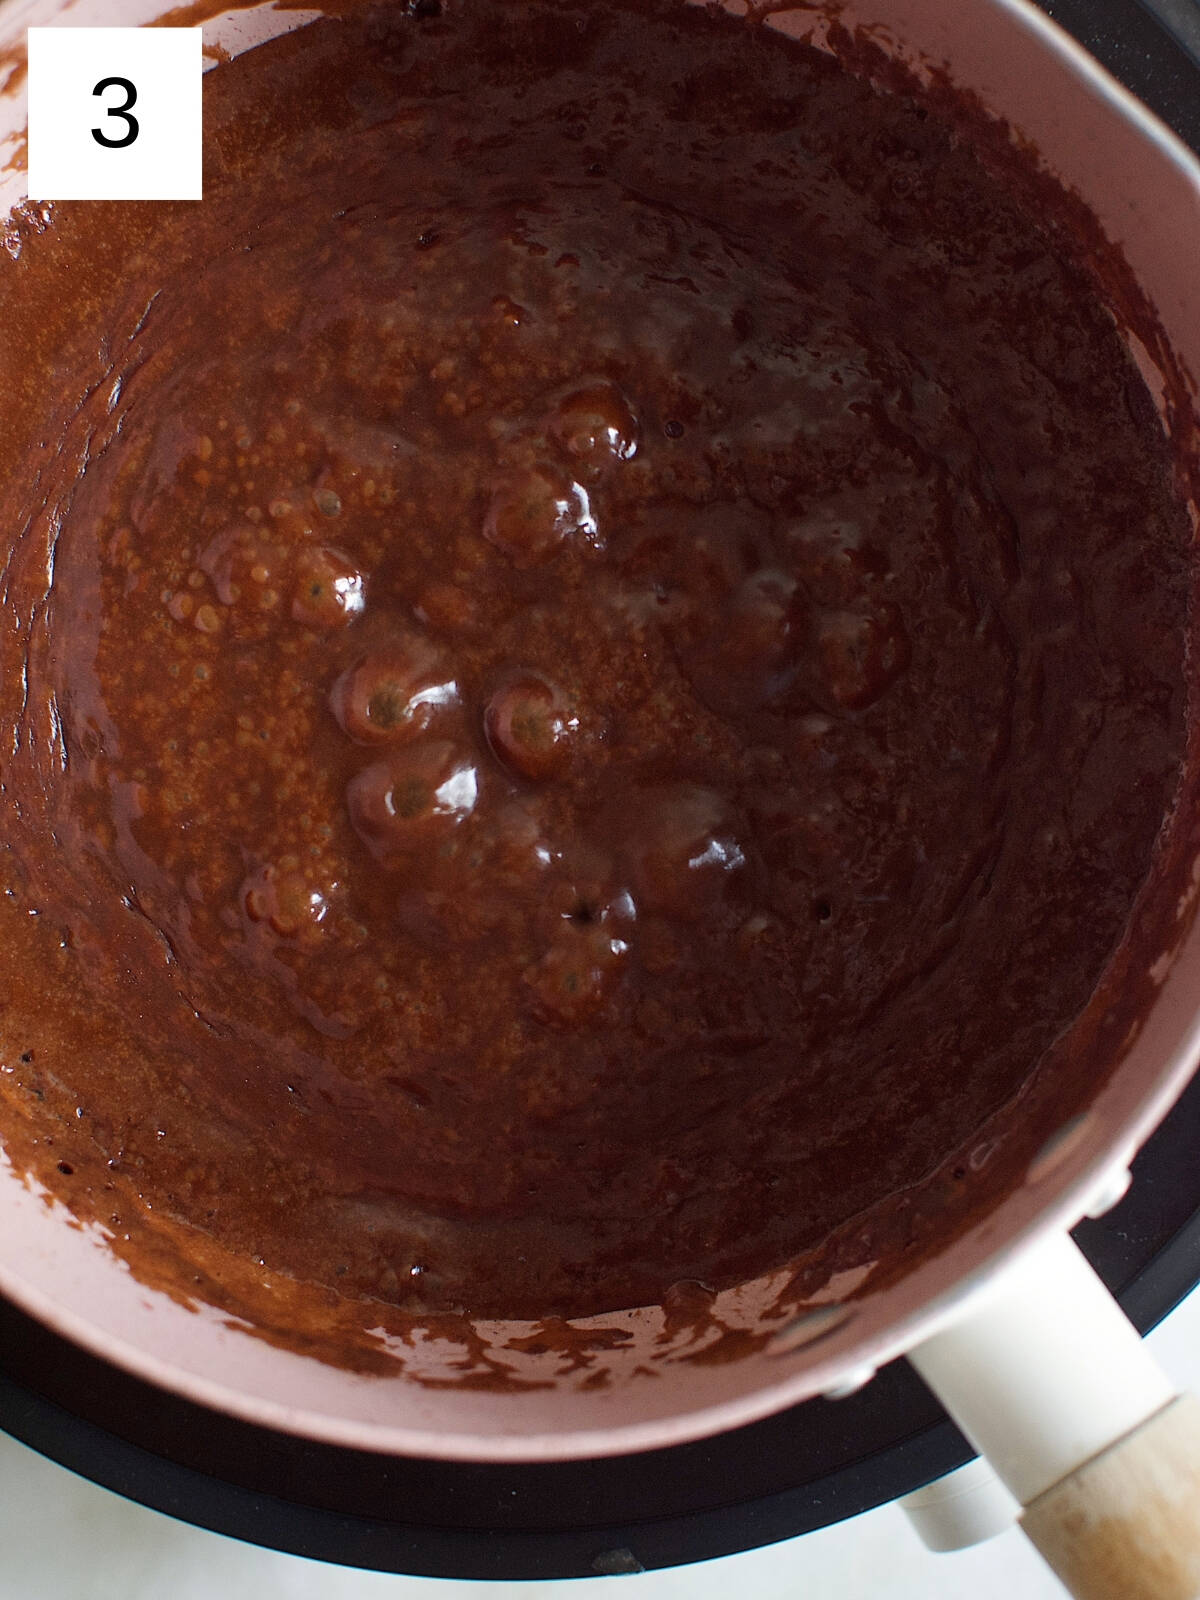 Boiled cocoa mixture in a heated nonstick pan.